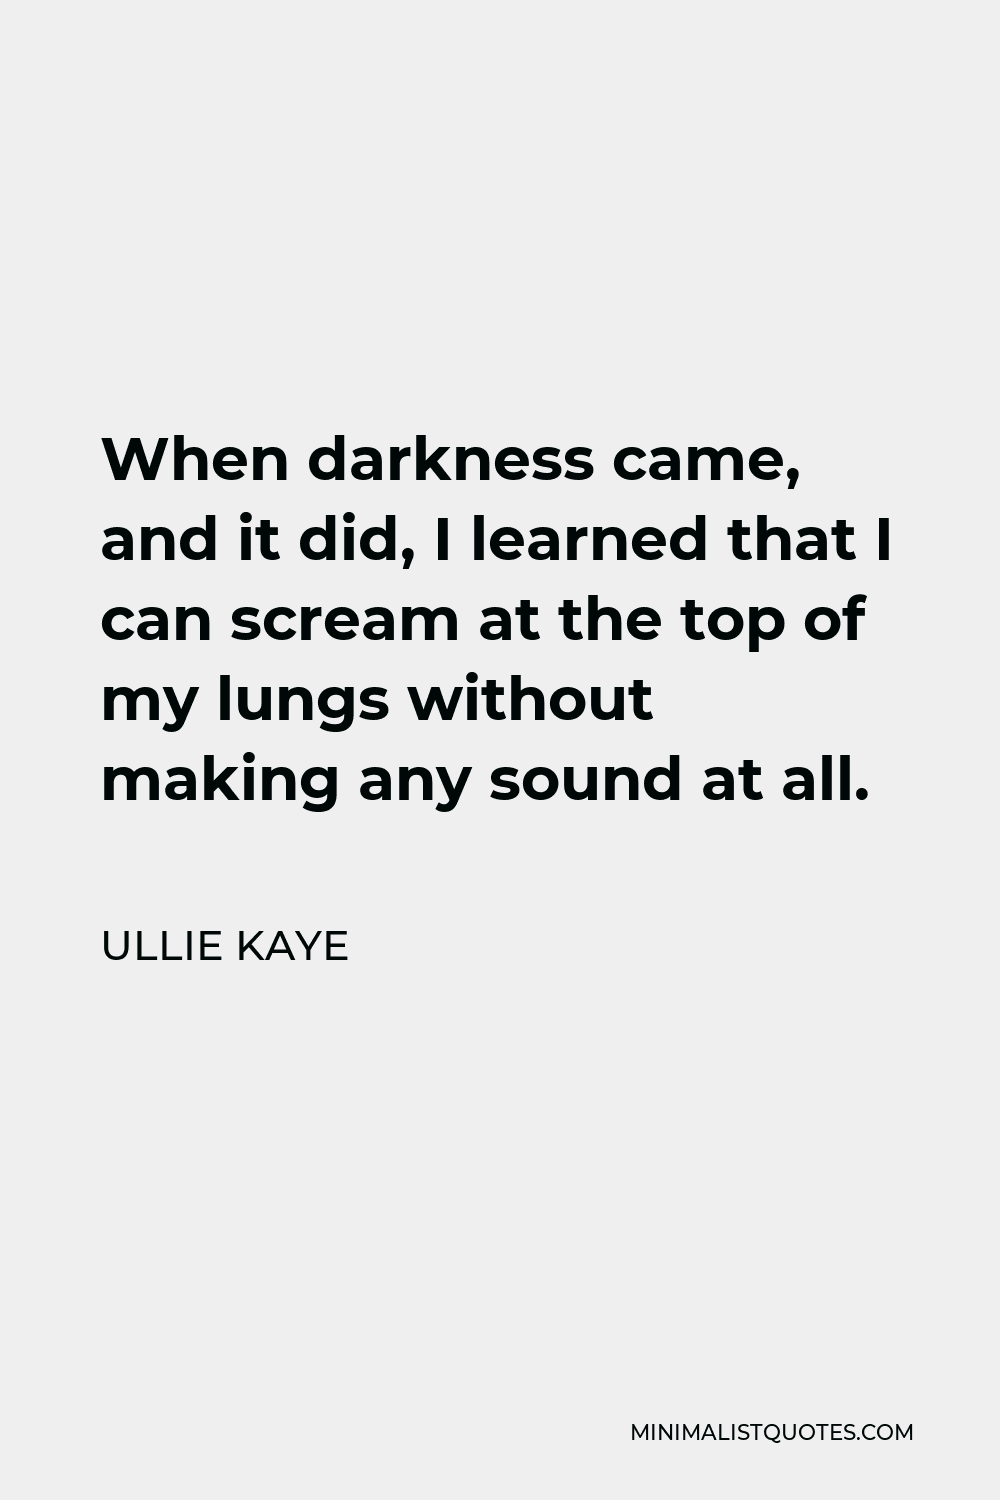 Ullie Kaye Quote - When darkness came, and it did, I learned that I can scream at the top of my lungs without making any sound at all.